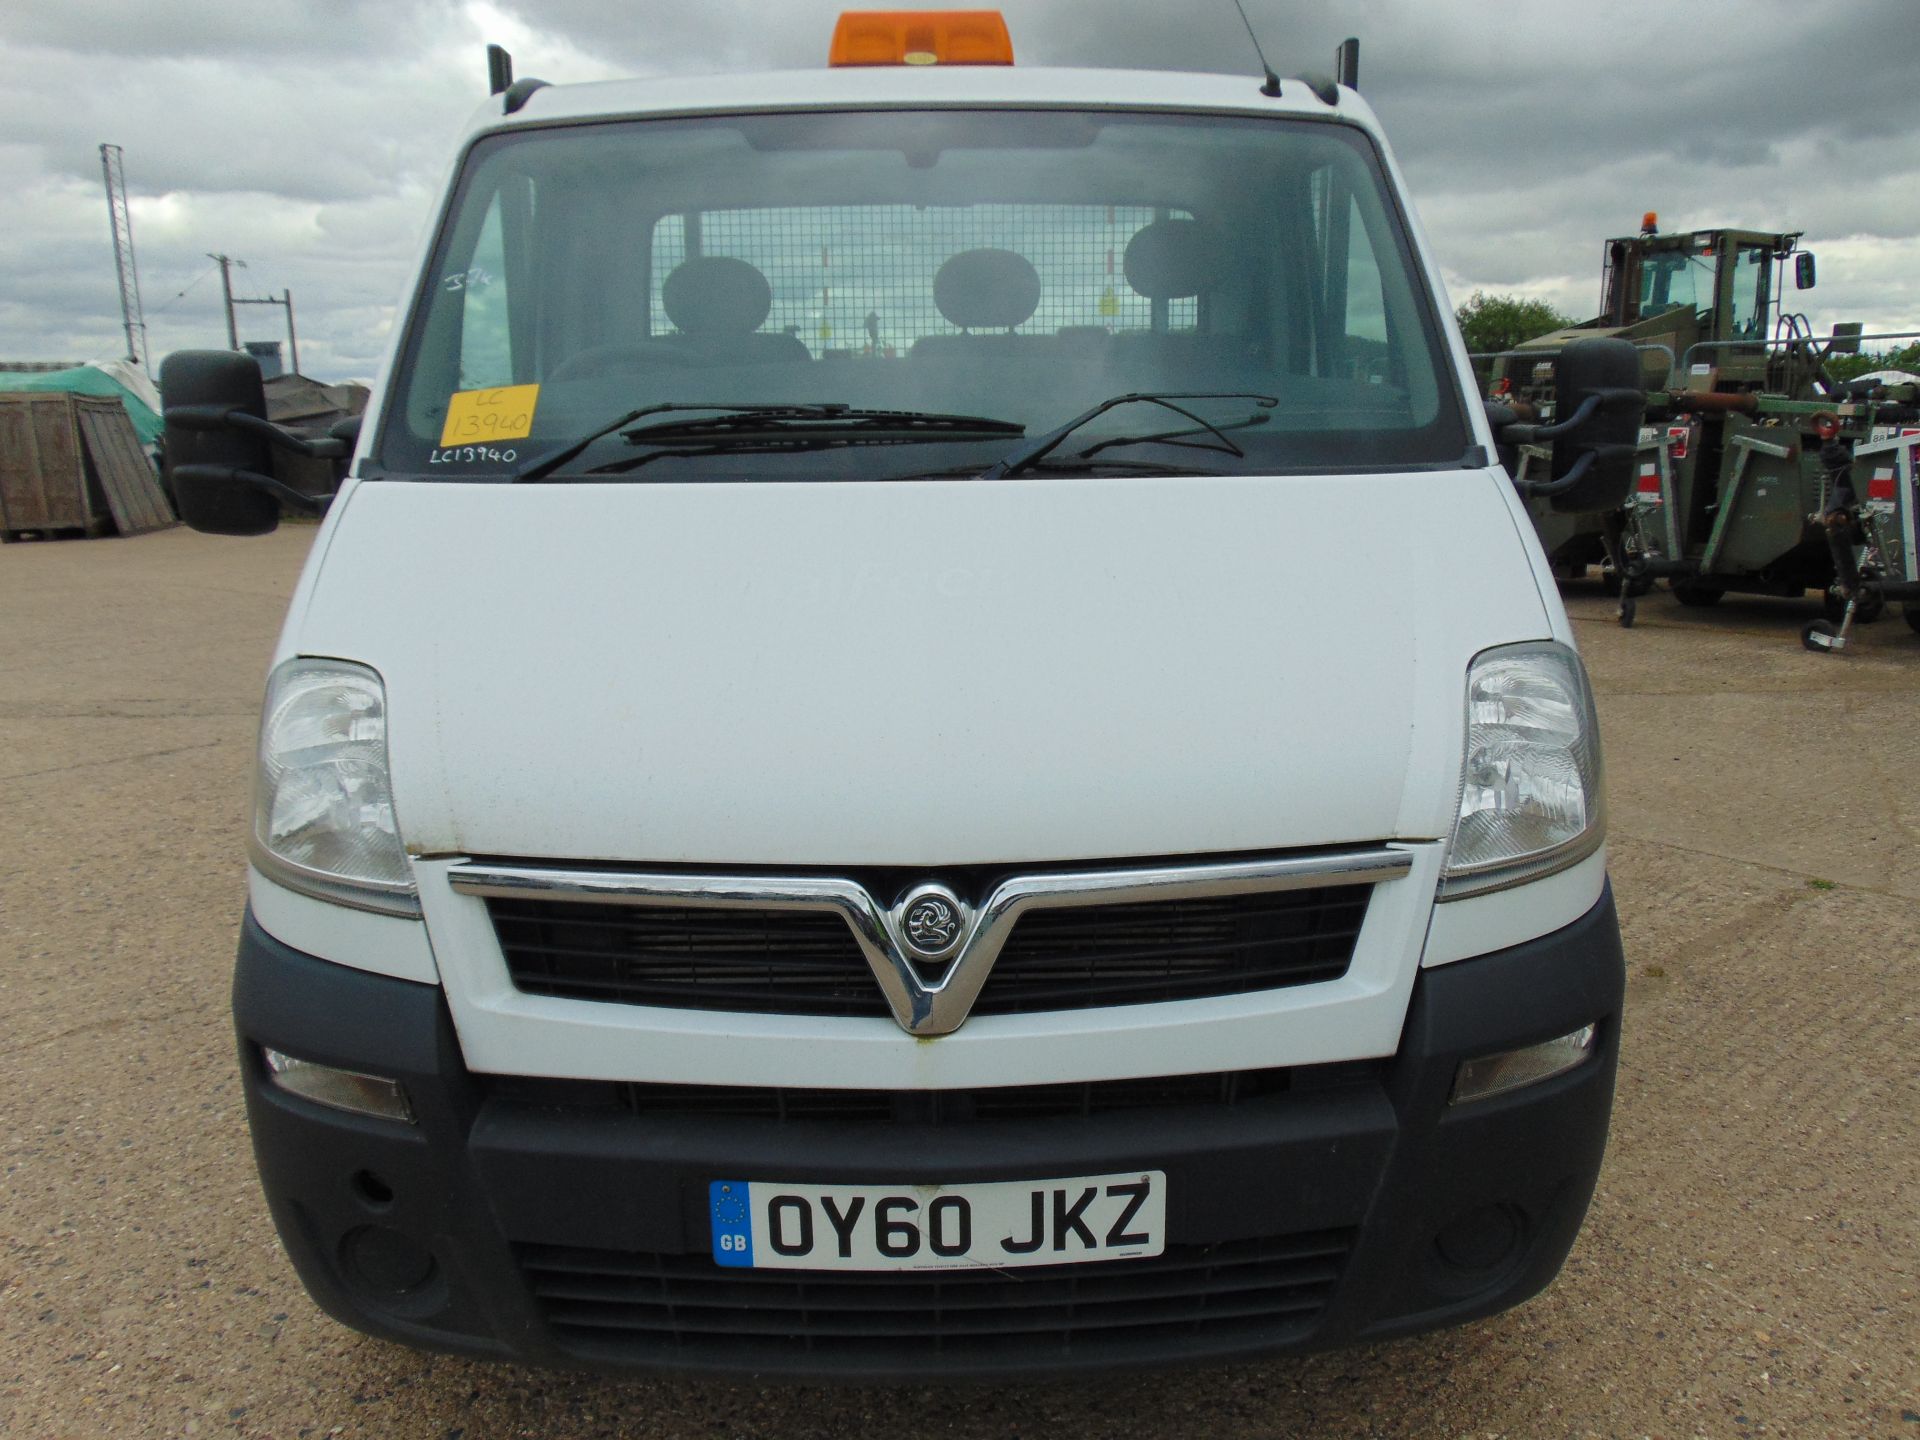 2010 Vauxhall Movano 3500 2.5 CDTi MWB Flat Bed Tipper - Image 2 of 15